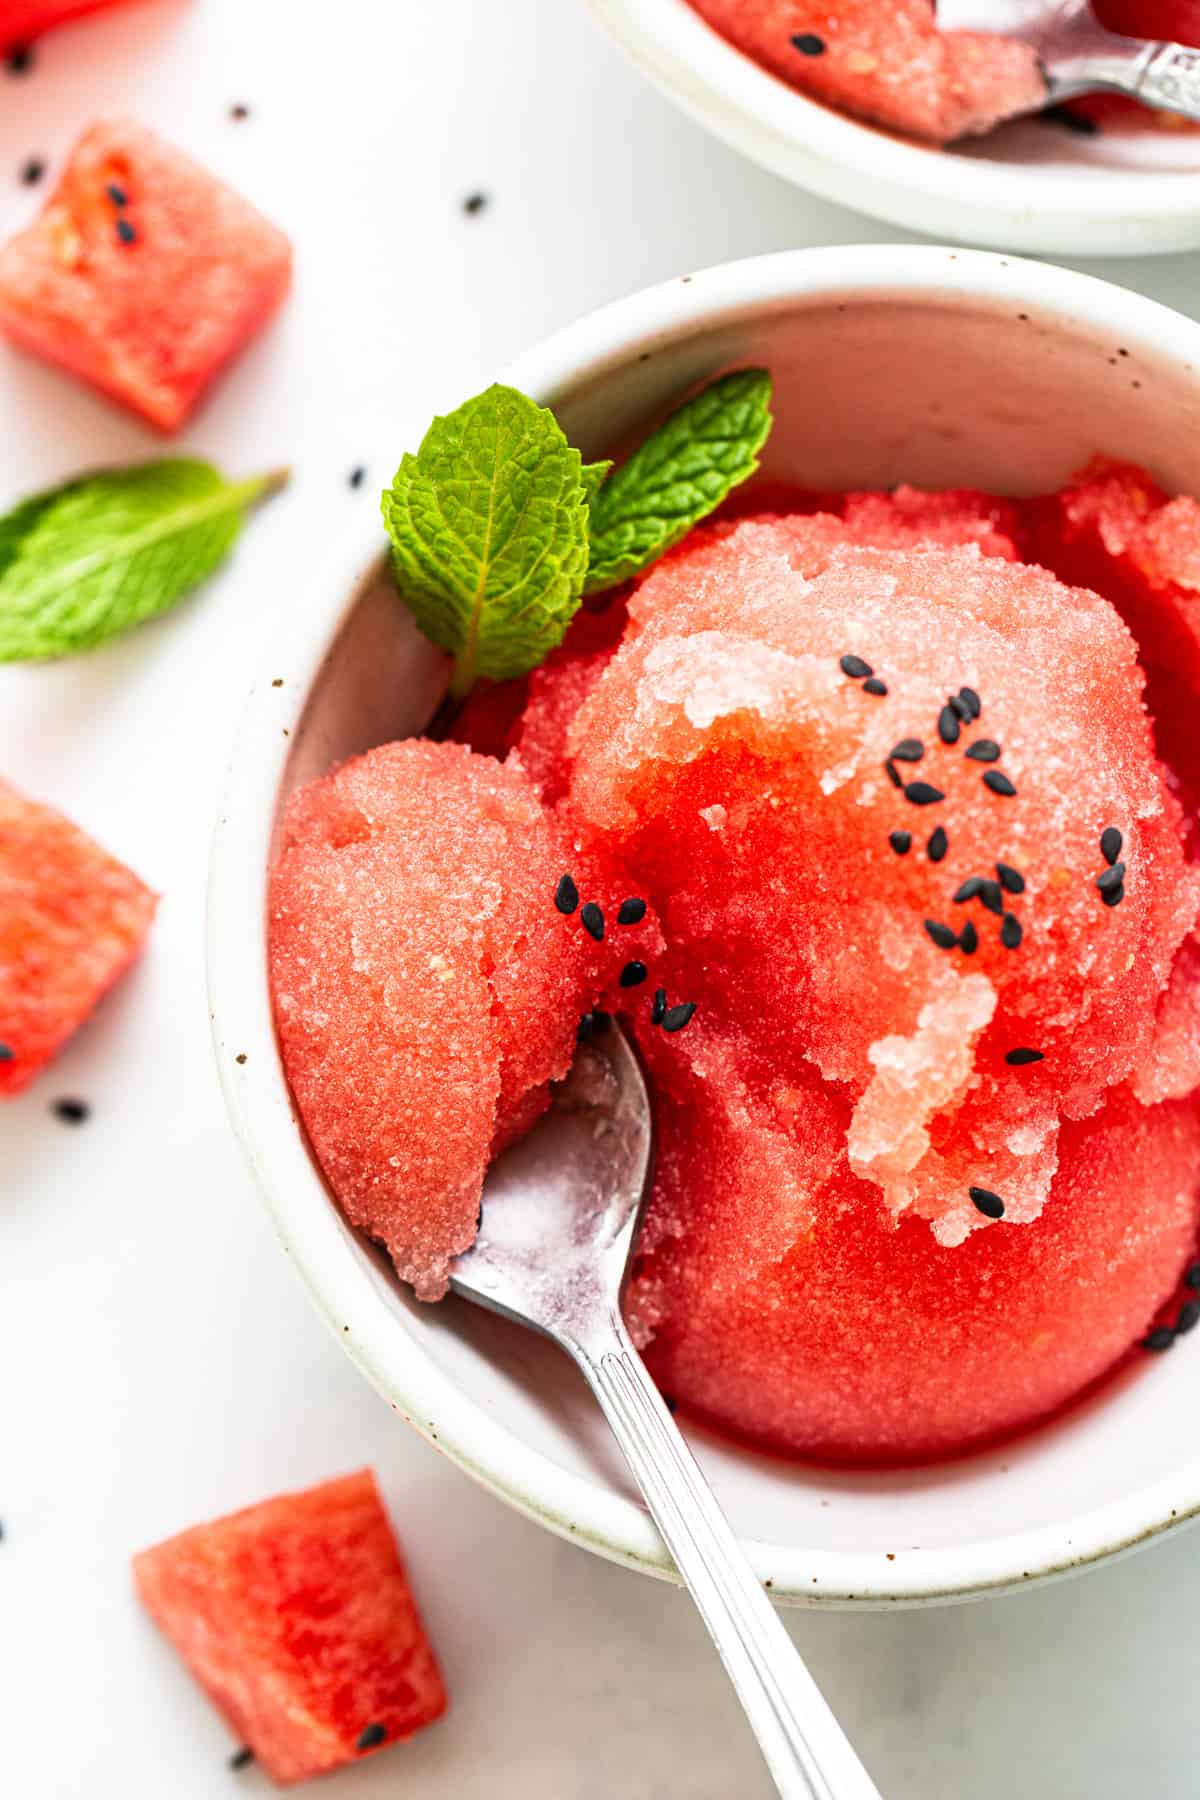 Bowl of watermelon sorbet garnished with mint leaves and black sesame seeds, with a s، and ،tered watermelon pieces around on a white background.